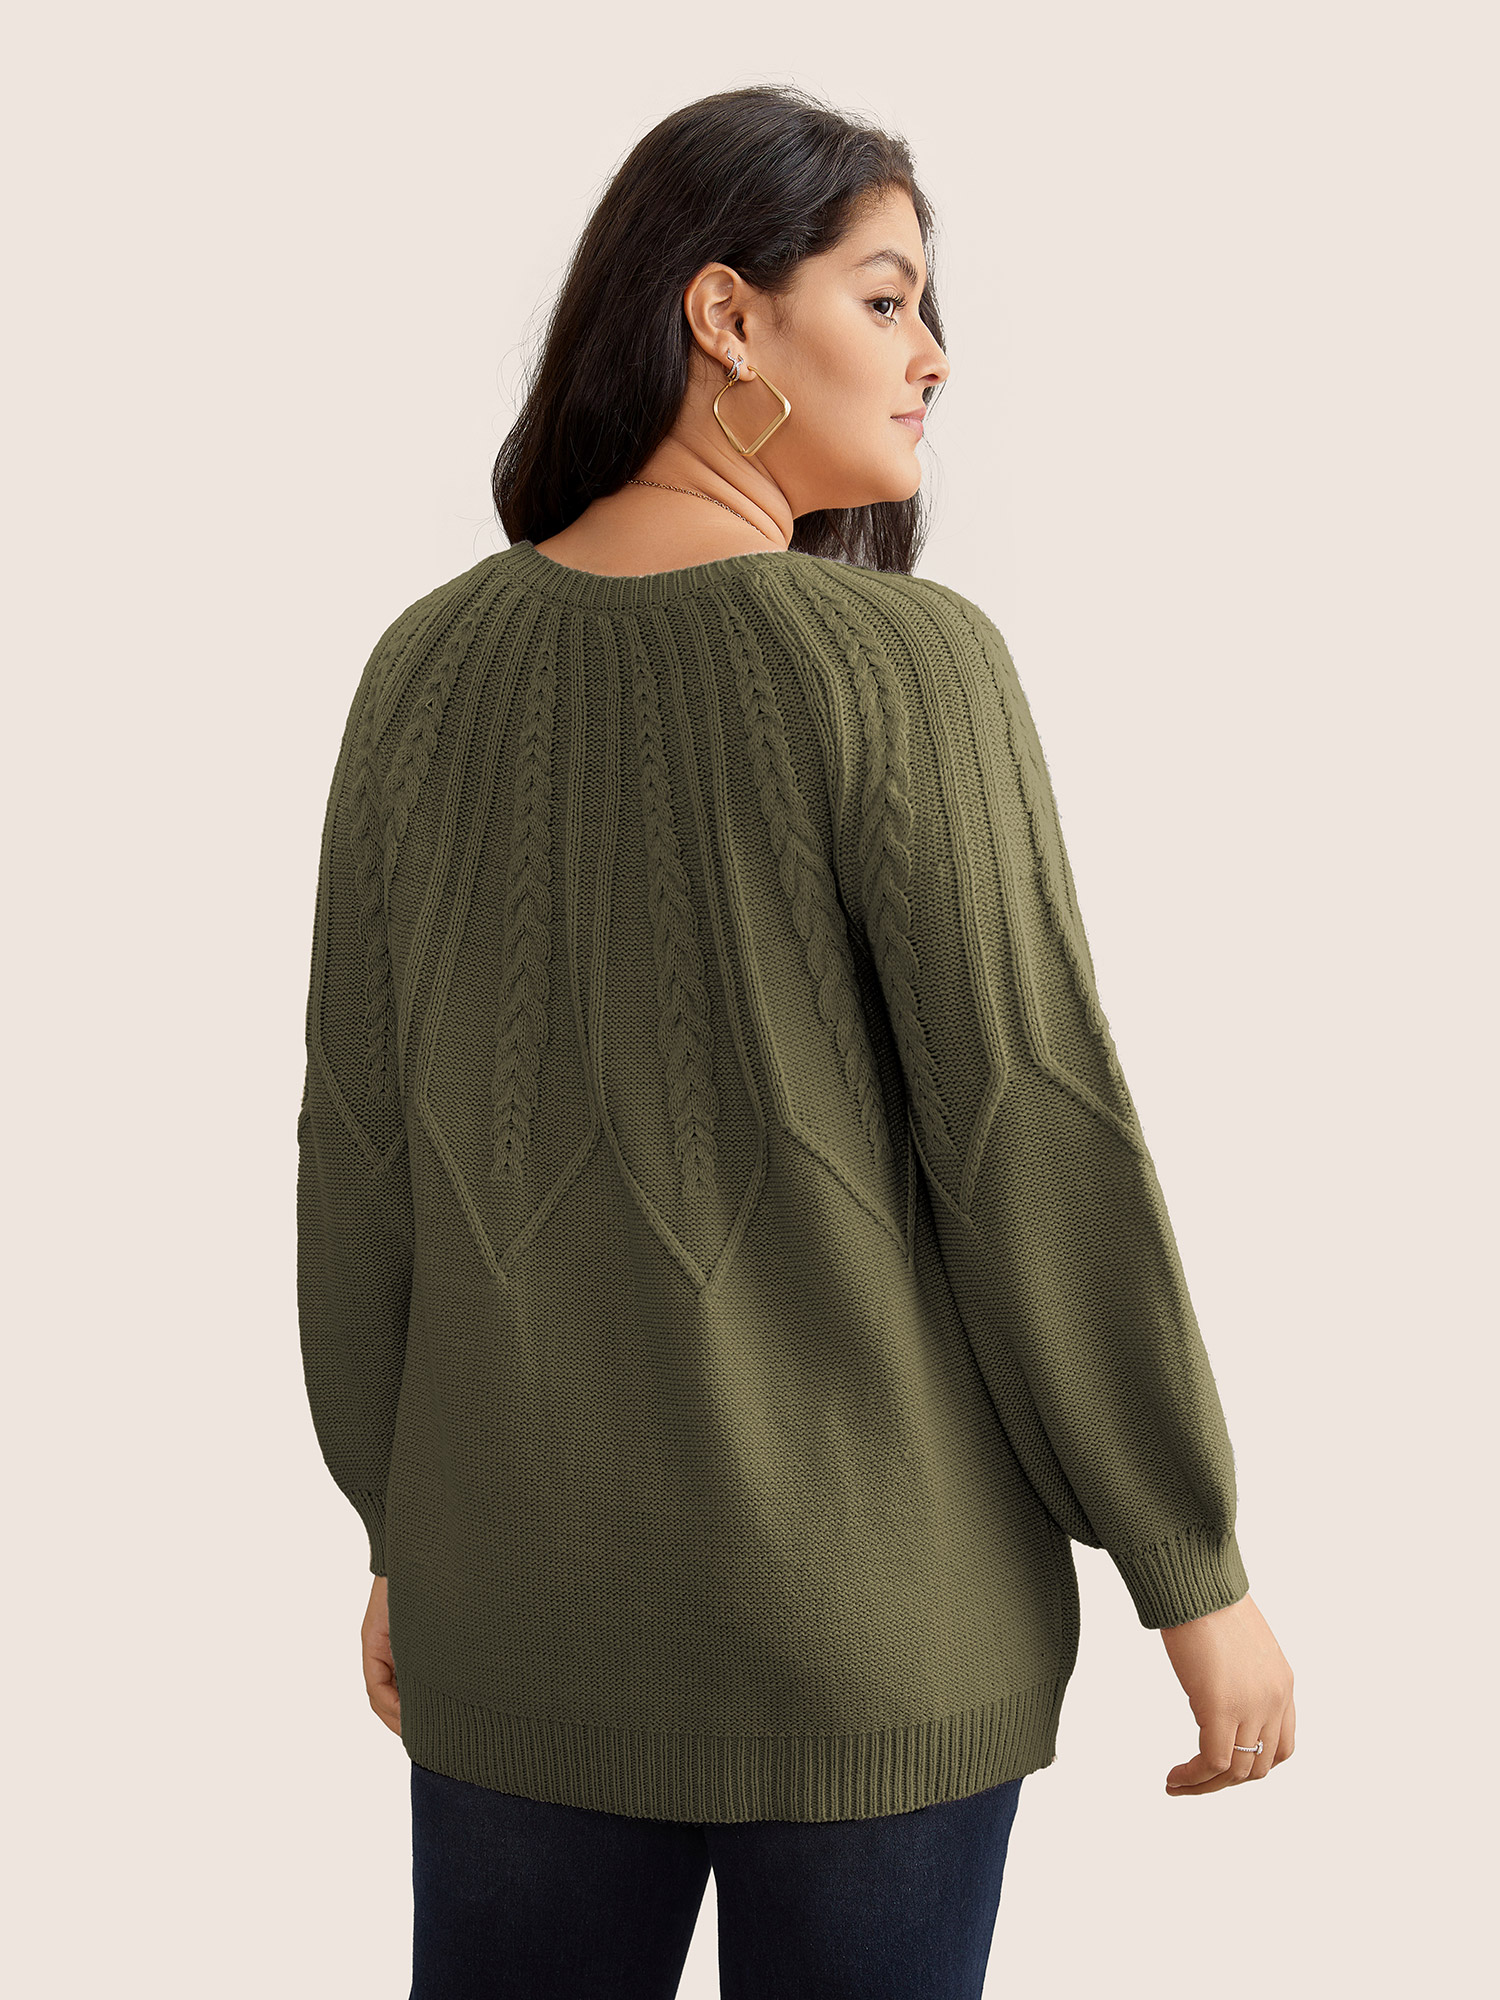 

Plus Size Solid Textured Lantern Sleeve Pullover ArmyGreen Women Basics Long Sleeve Round Neck Everyday Pullovers BloomChic